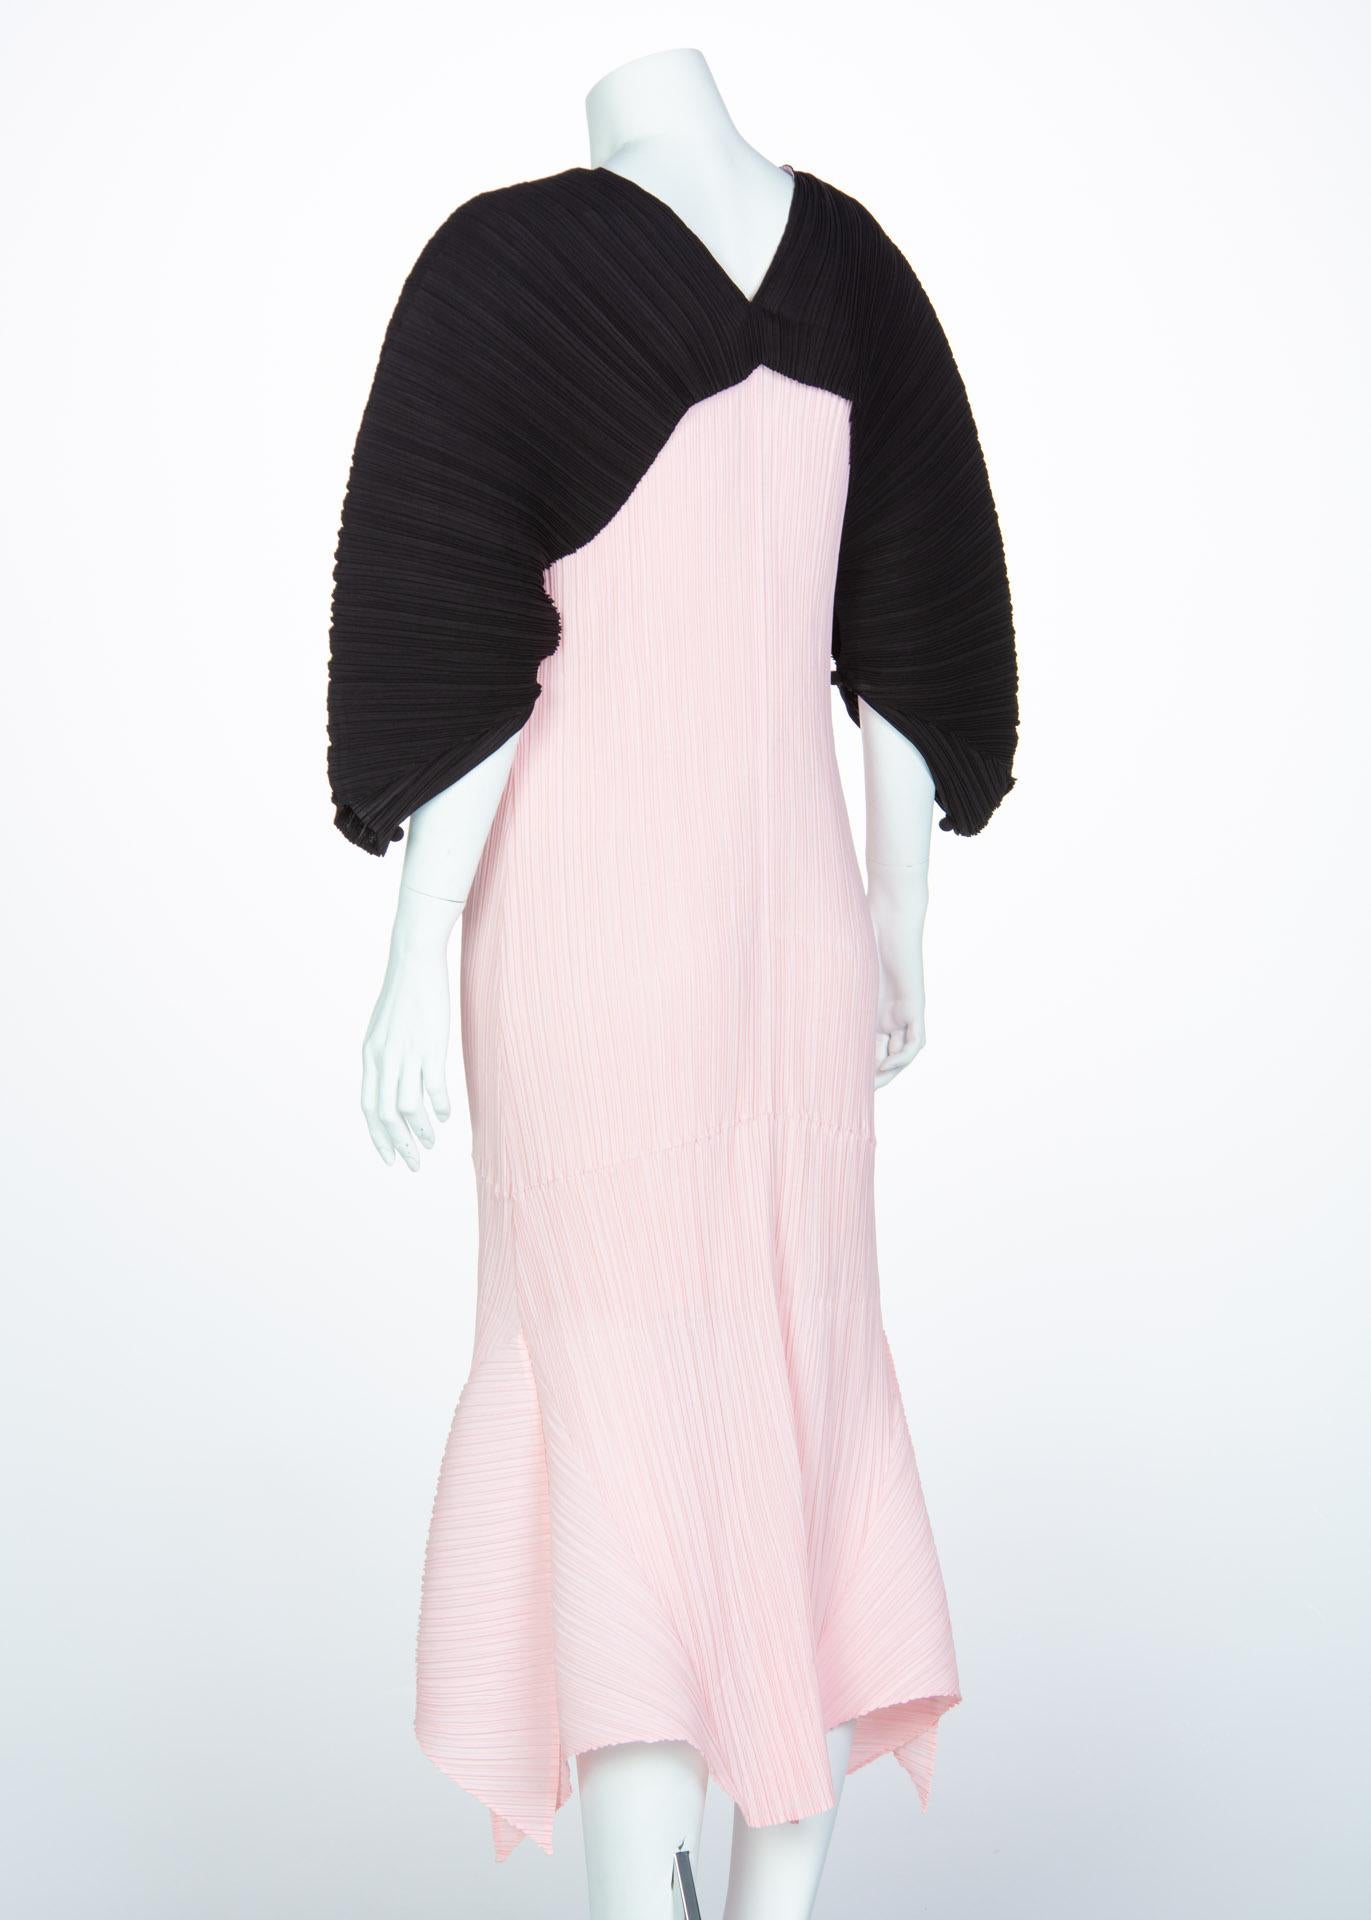 Issey Miyake Fette Pink Black Pleated Origami Dress In Excellent Condition In Boca Raton, FL